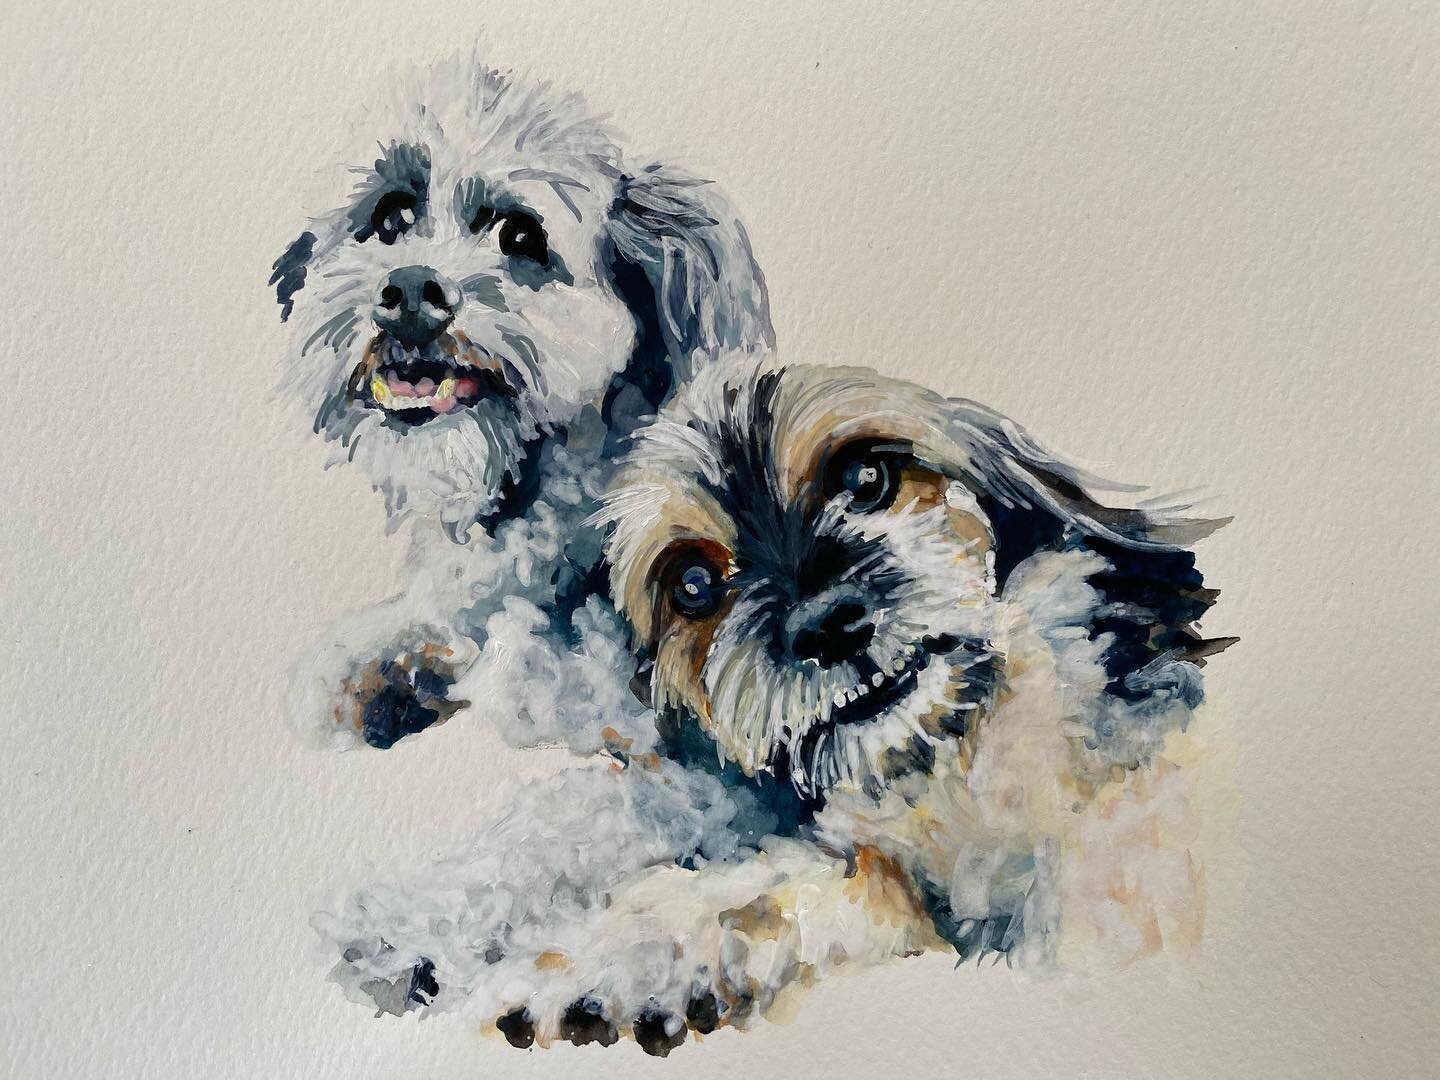 Two Loved Dogs
Watercolor on paper
PassersBy Gallery
 
This was a gifted painting to someone who works in a crematorium . The past year has been the hardest for him. He works a minimum of six days a week, long hours, barely seeing his family. Ha has 